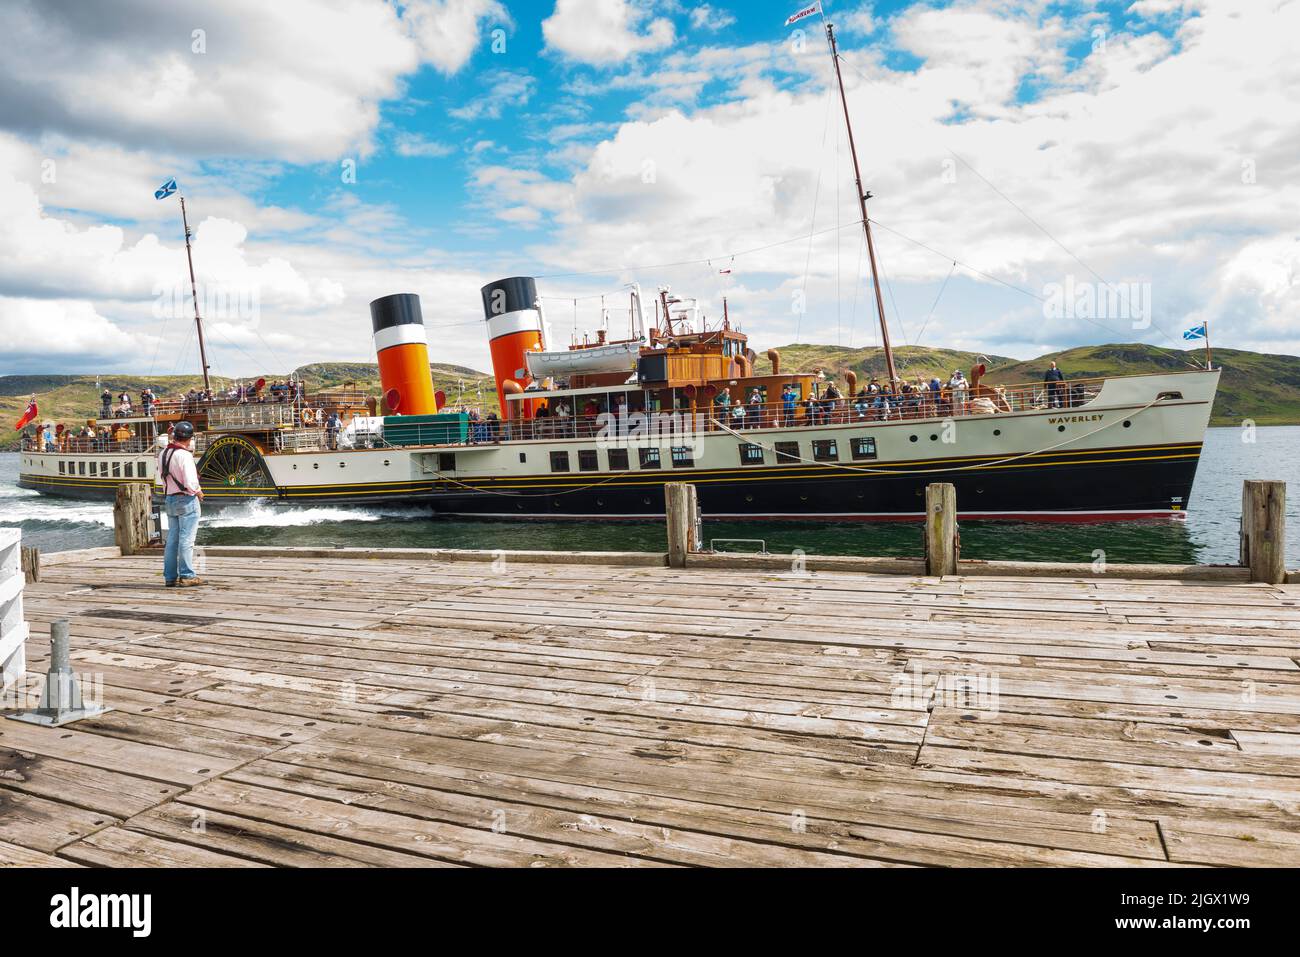 Paddle Steamer Waverley at Tighnabruaich Pier Kyles of Bute Stock Photo